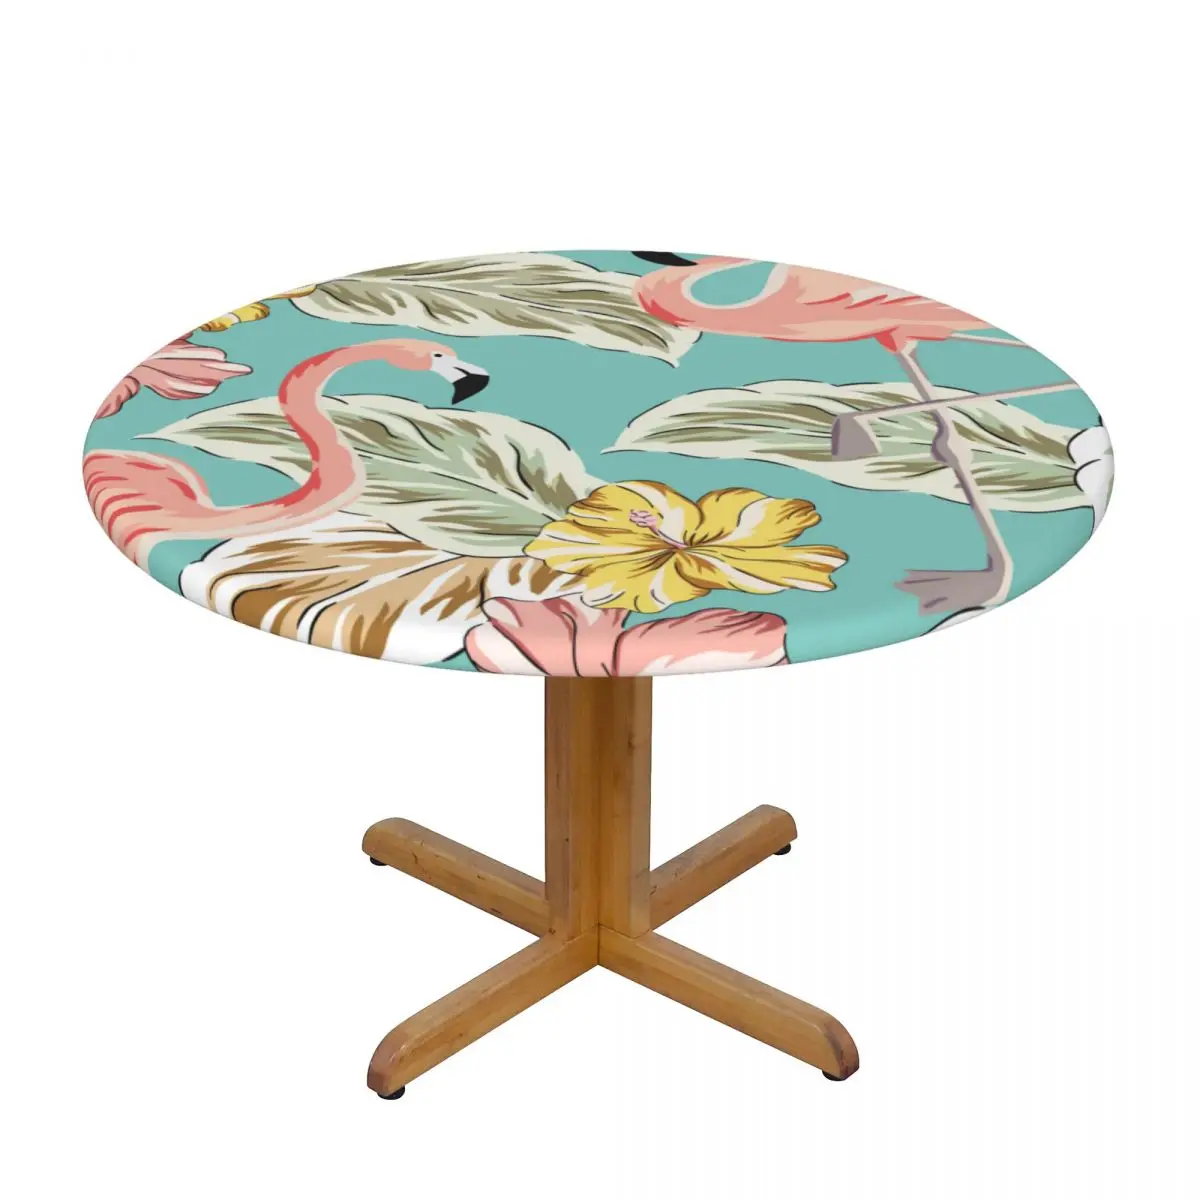 

Waterproof Tablecloths Round Elastic Tablecloth Tropical Flamingo Hibiscus And Palm Leaves Table Cloth Cover Coffee Table Pad